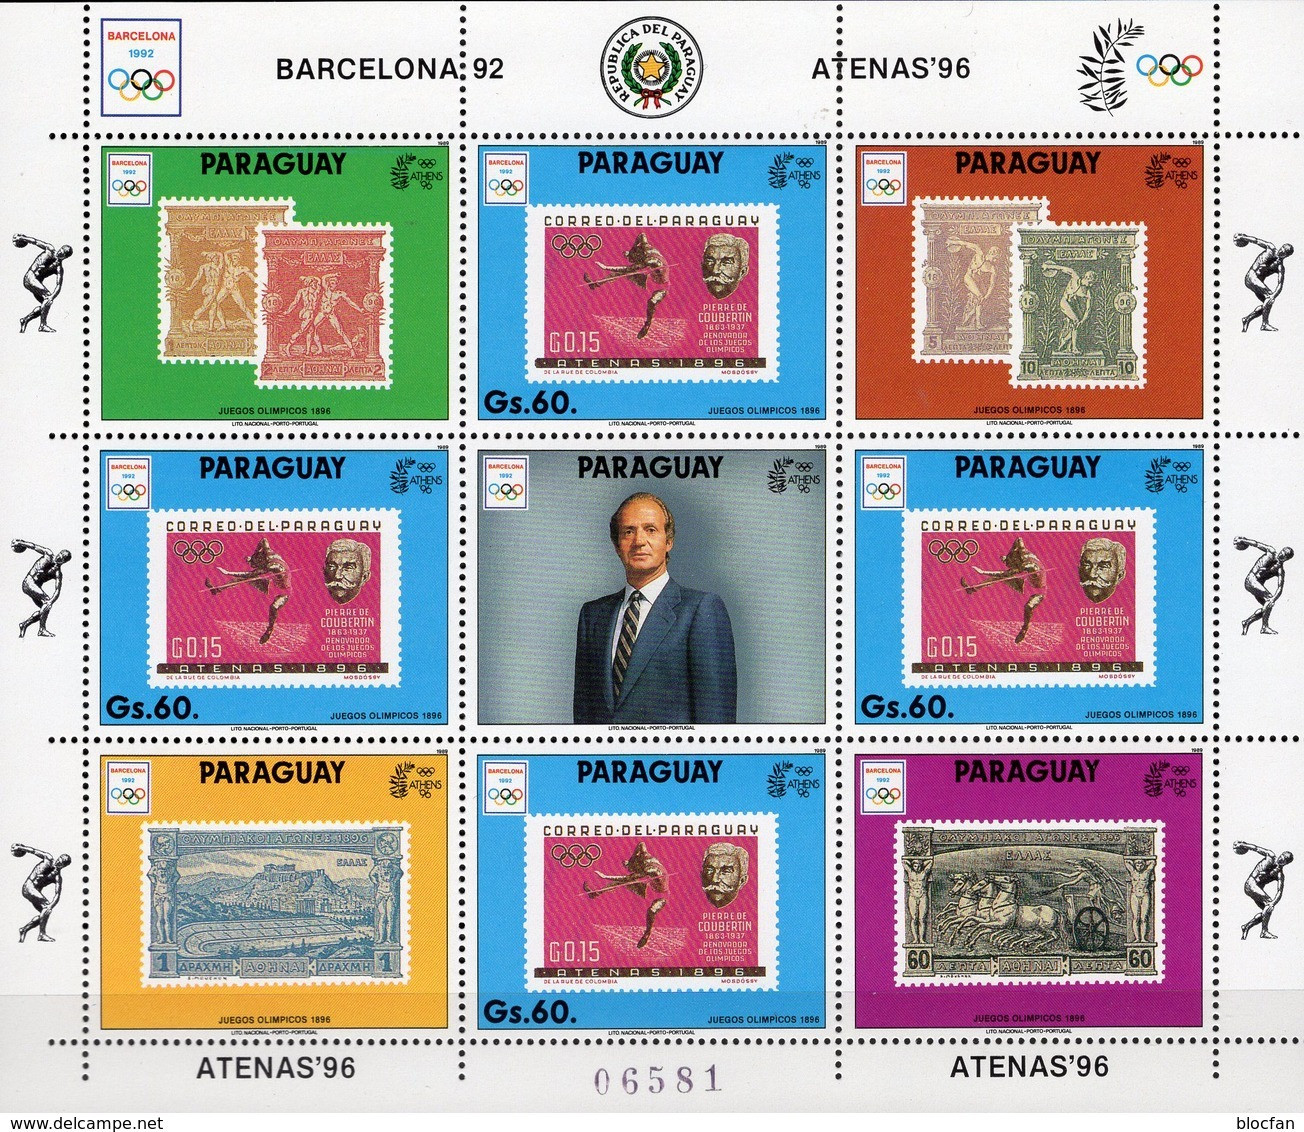 Olympia Athen 1896 Paraguay 4449 9-KB ** 36€ Barcelona 1992 Stamp On Stamps M/s Hoja Bloc Sheet Ss Sheetlet Bf Olympics - Zomer 1896: Athene